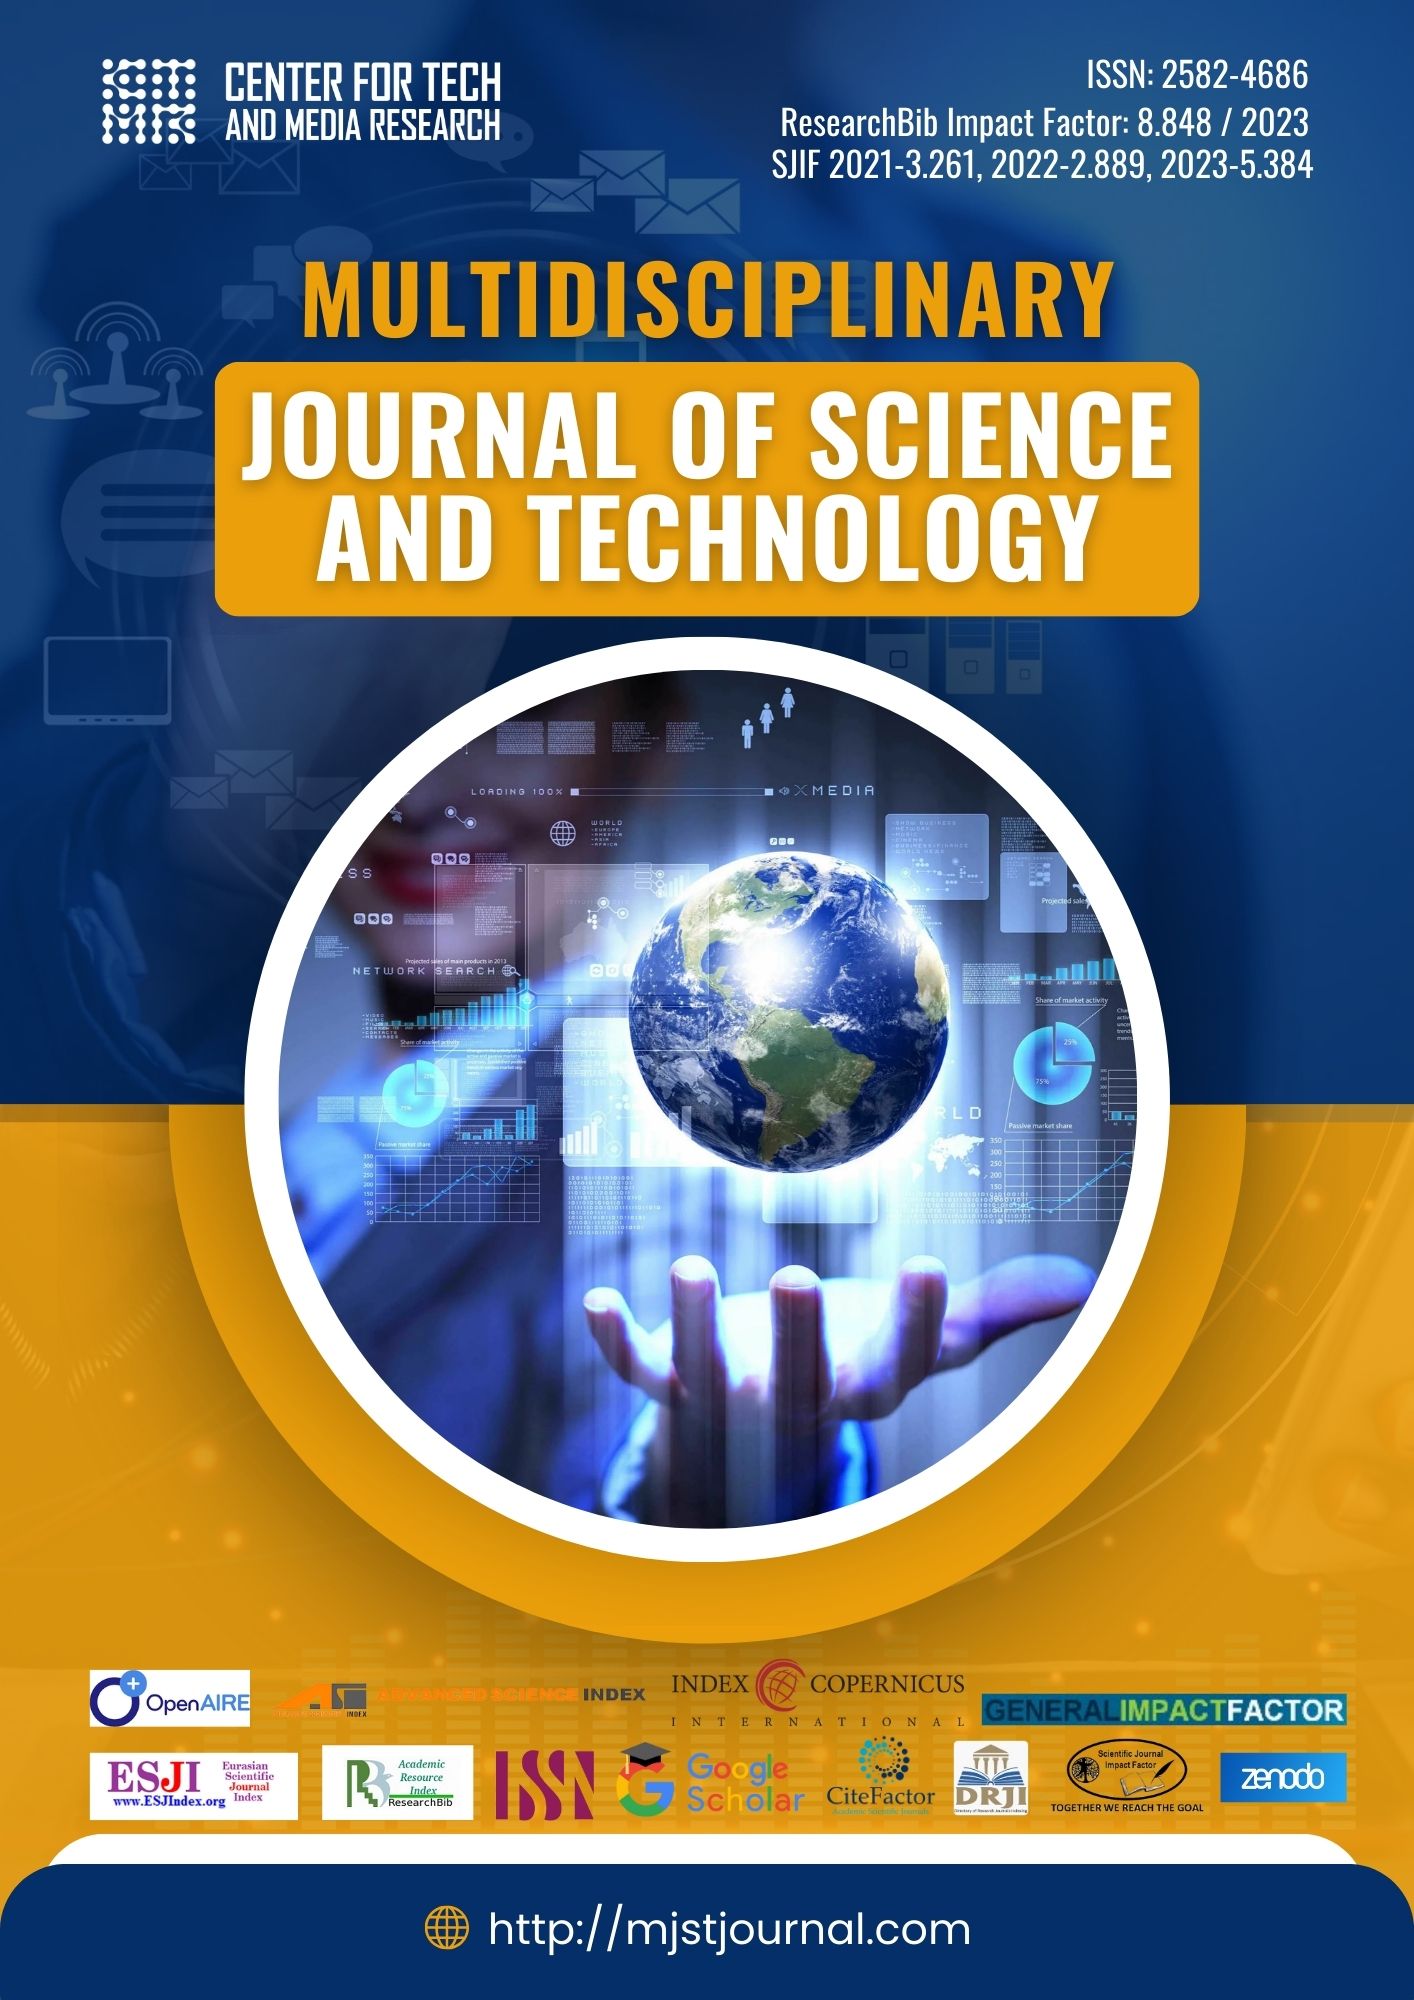                         View Vol. 4 No. 3 (2024): MULTIDISCIPLINARY JOURNAL OF SCIENCE AND TECHNOLOGY
                    